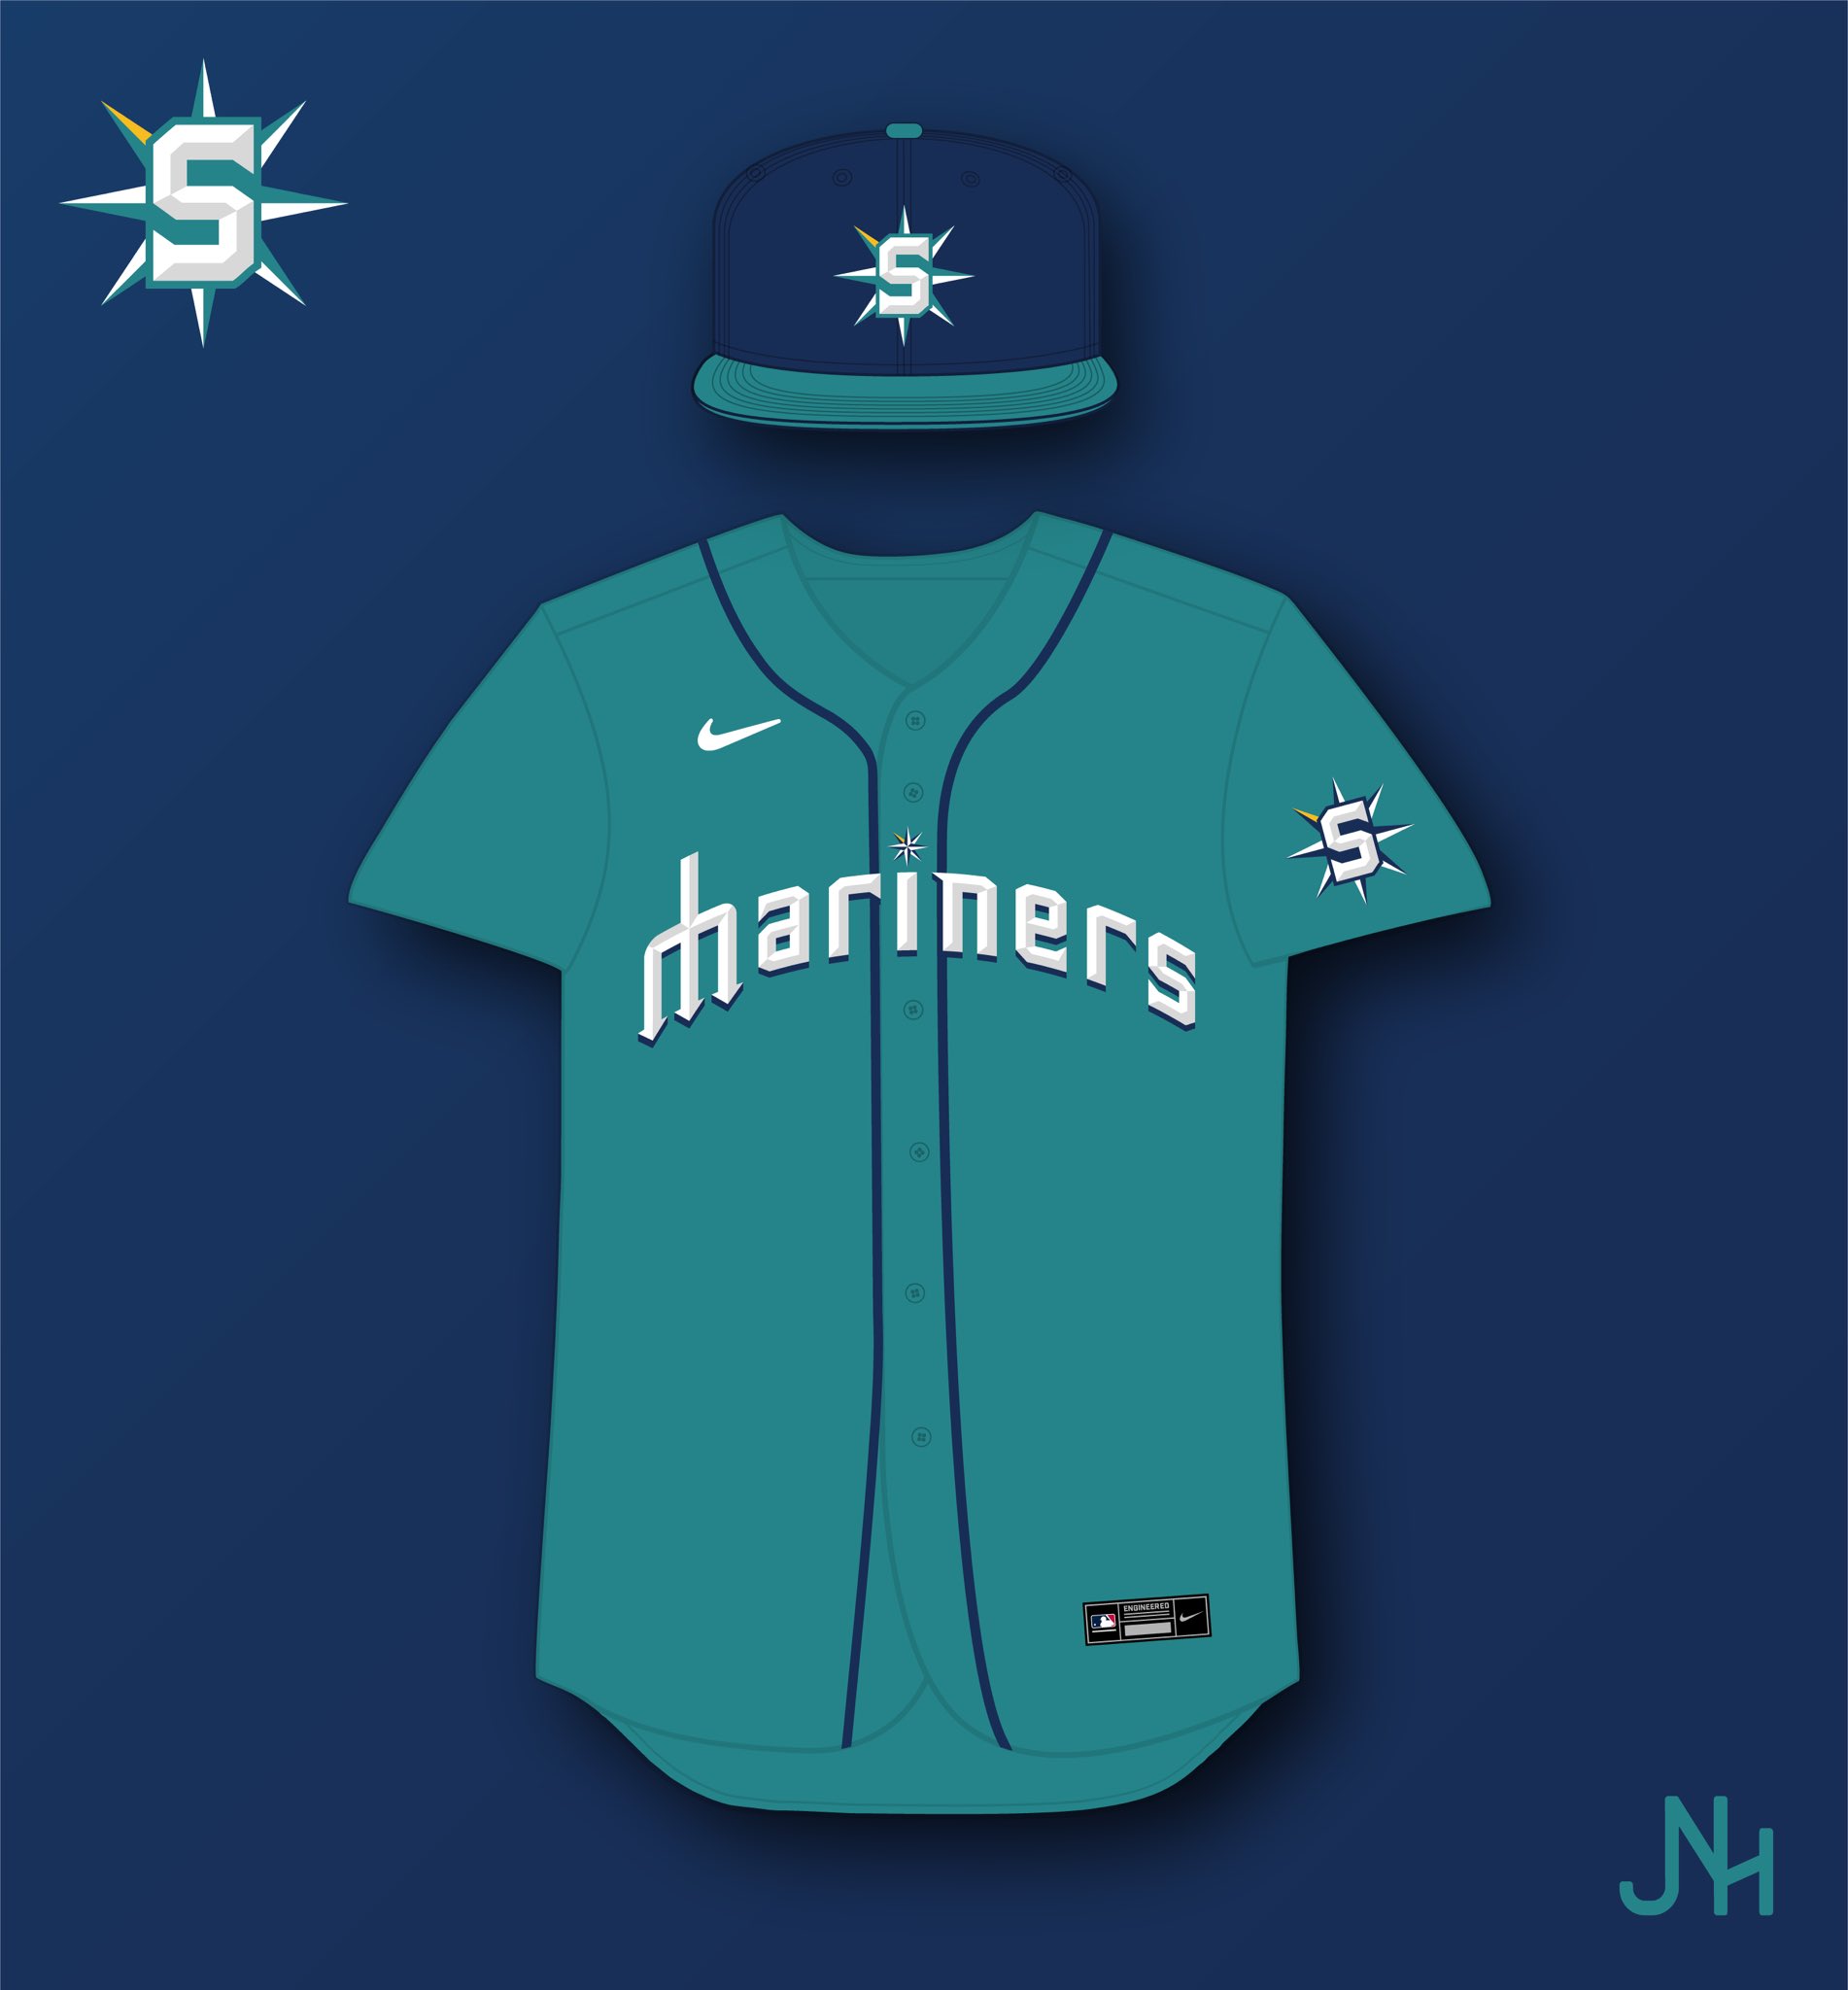 Seattle Mariners Brand Refresh - Concepts - Chris Creamer's Sports